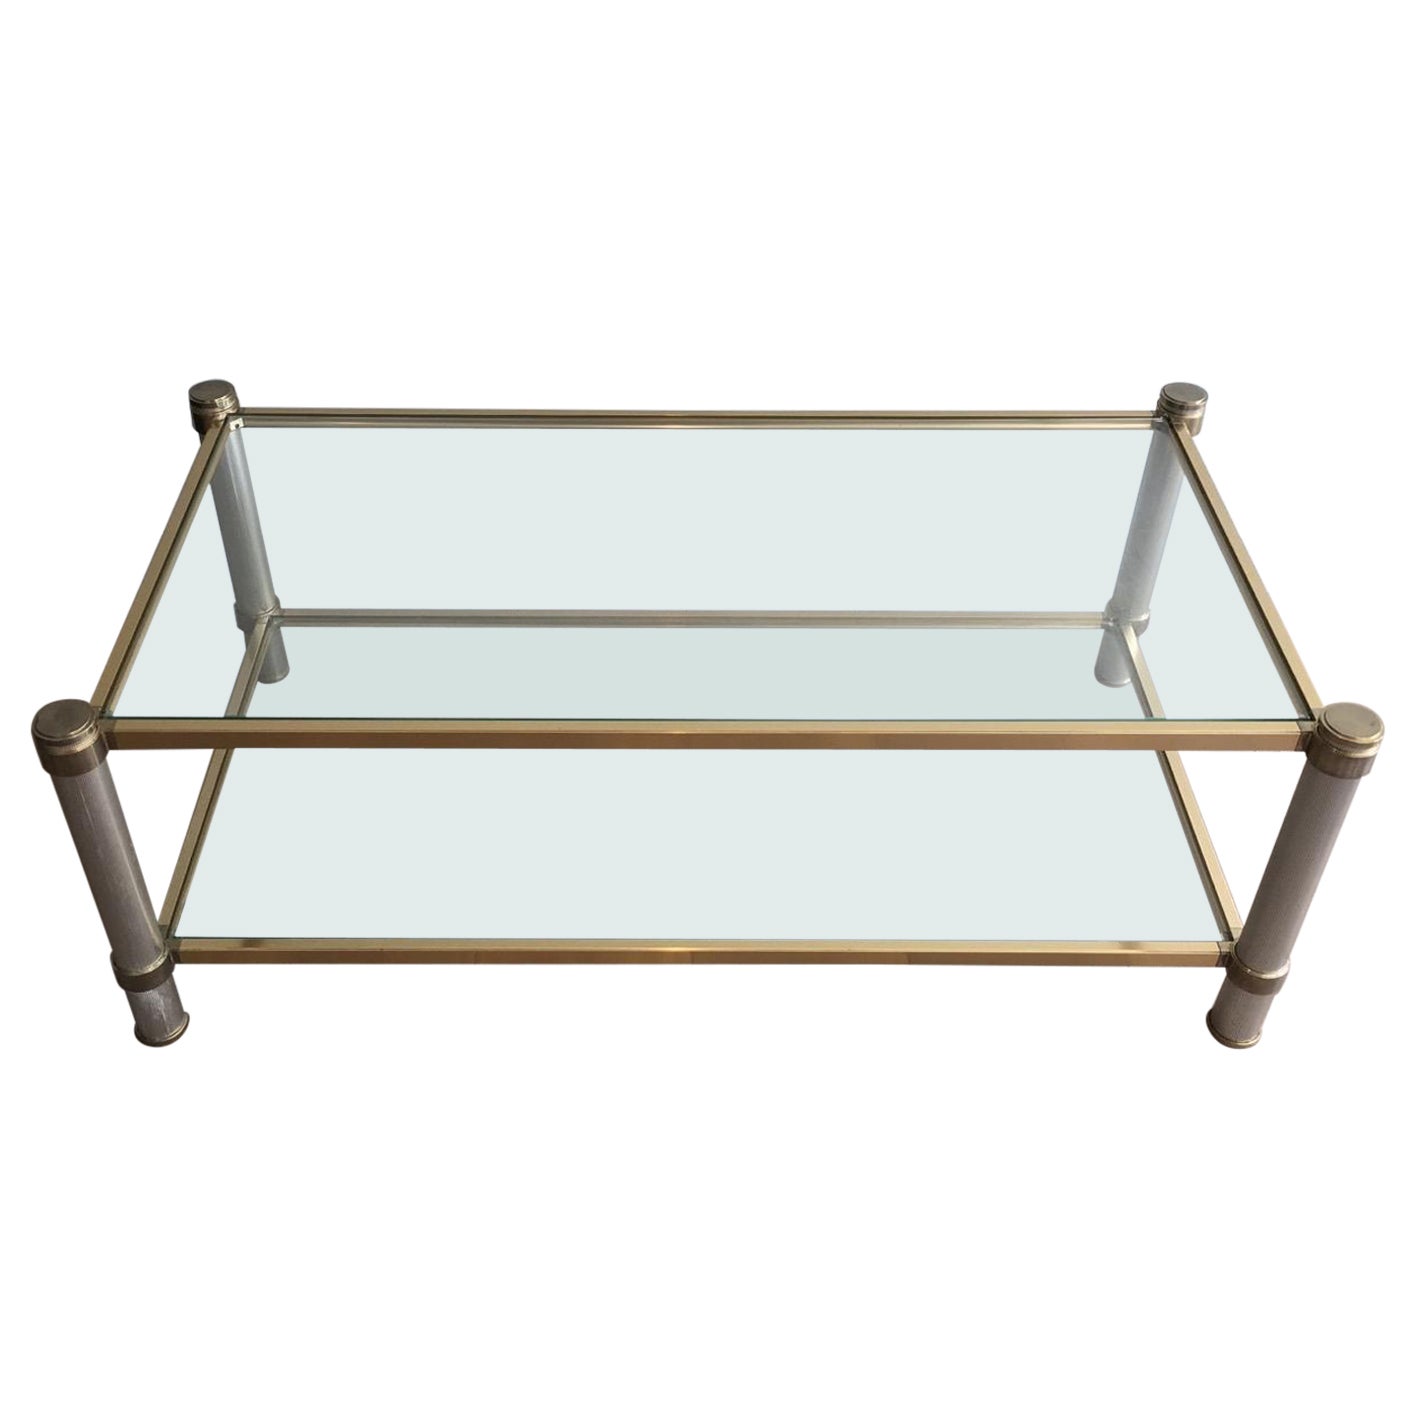  Gold Gilt and Silver Color Aluminium Coffee table with Fluted Legs by P. Vandel